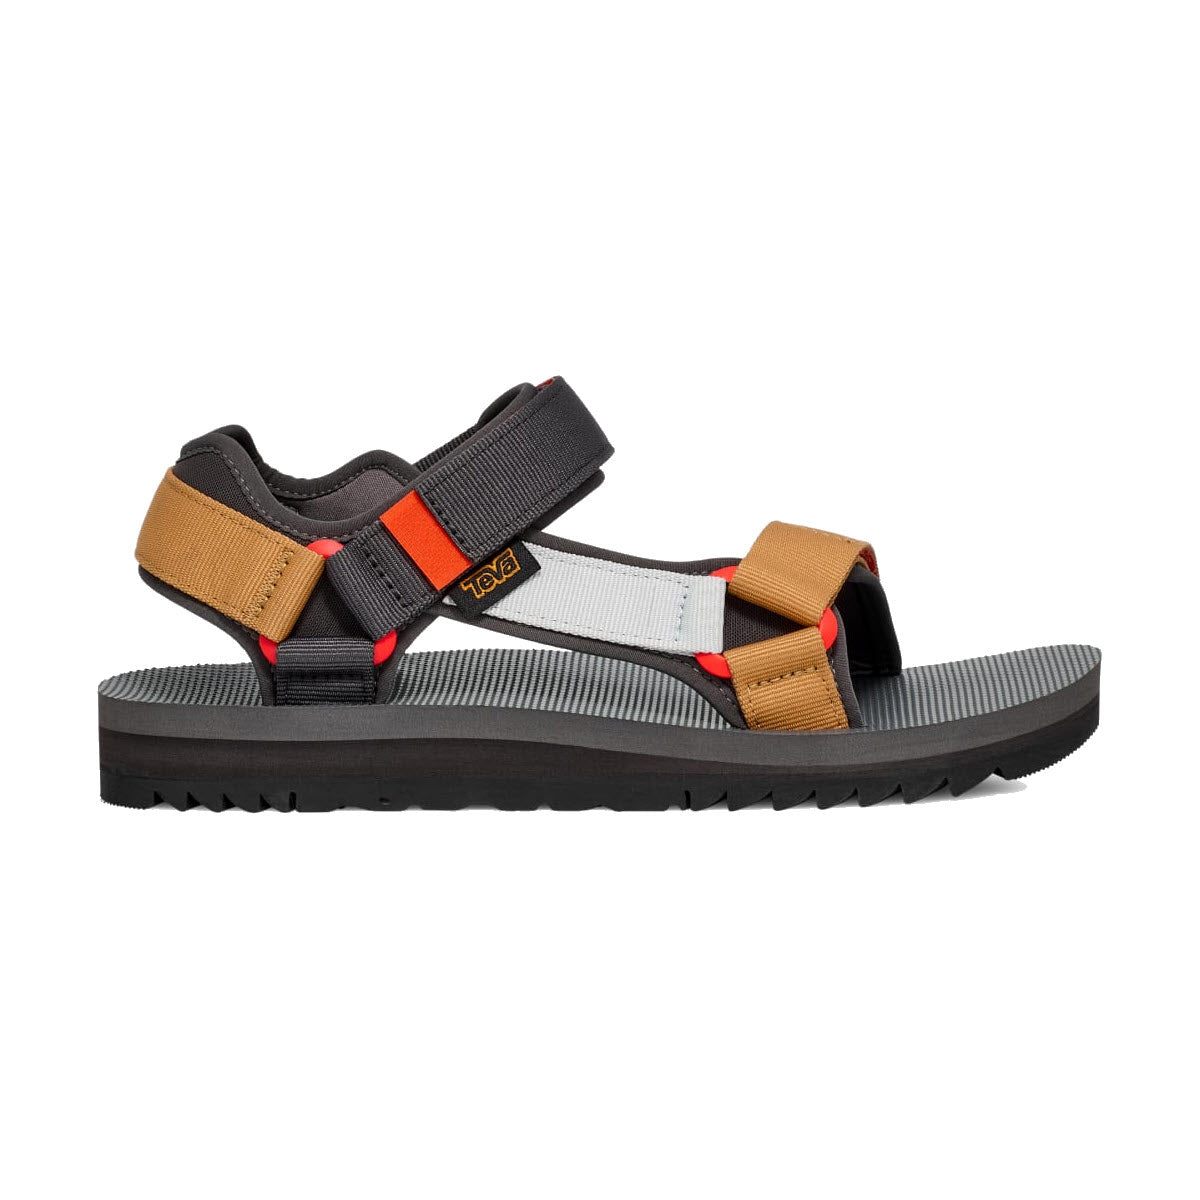 A side view of a Teva Universal Trail sandal with adjustable REPREVE® recycled polyester straps in gray, orange, and mustard colors against a white background.